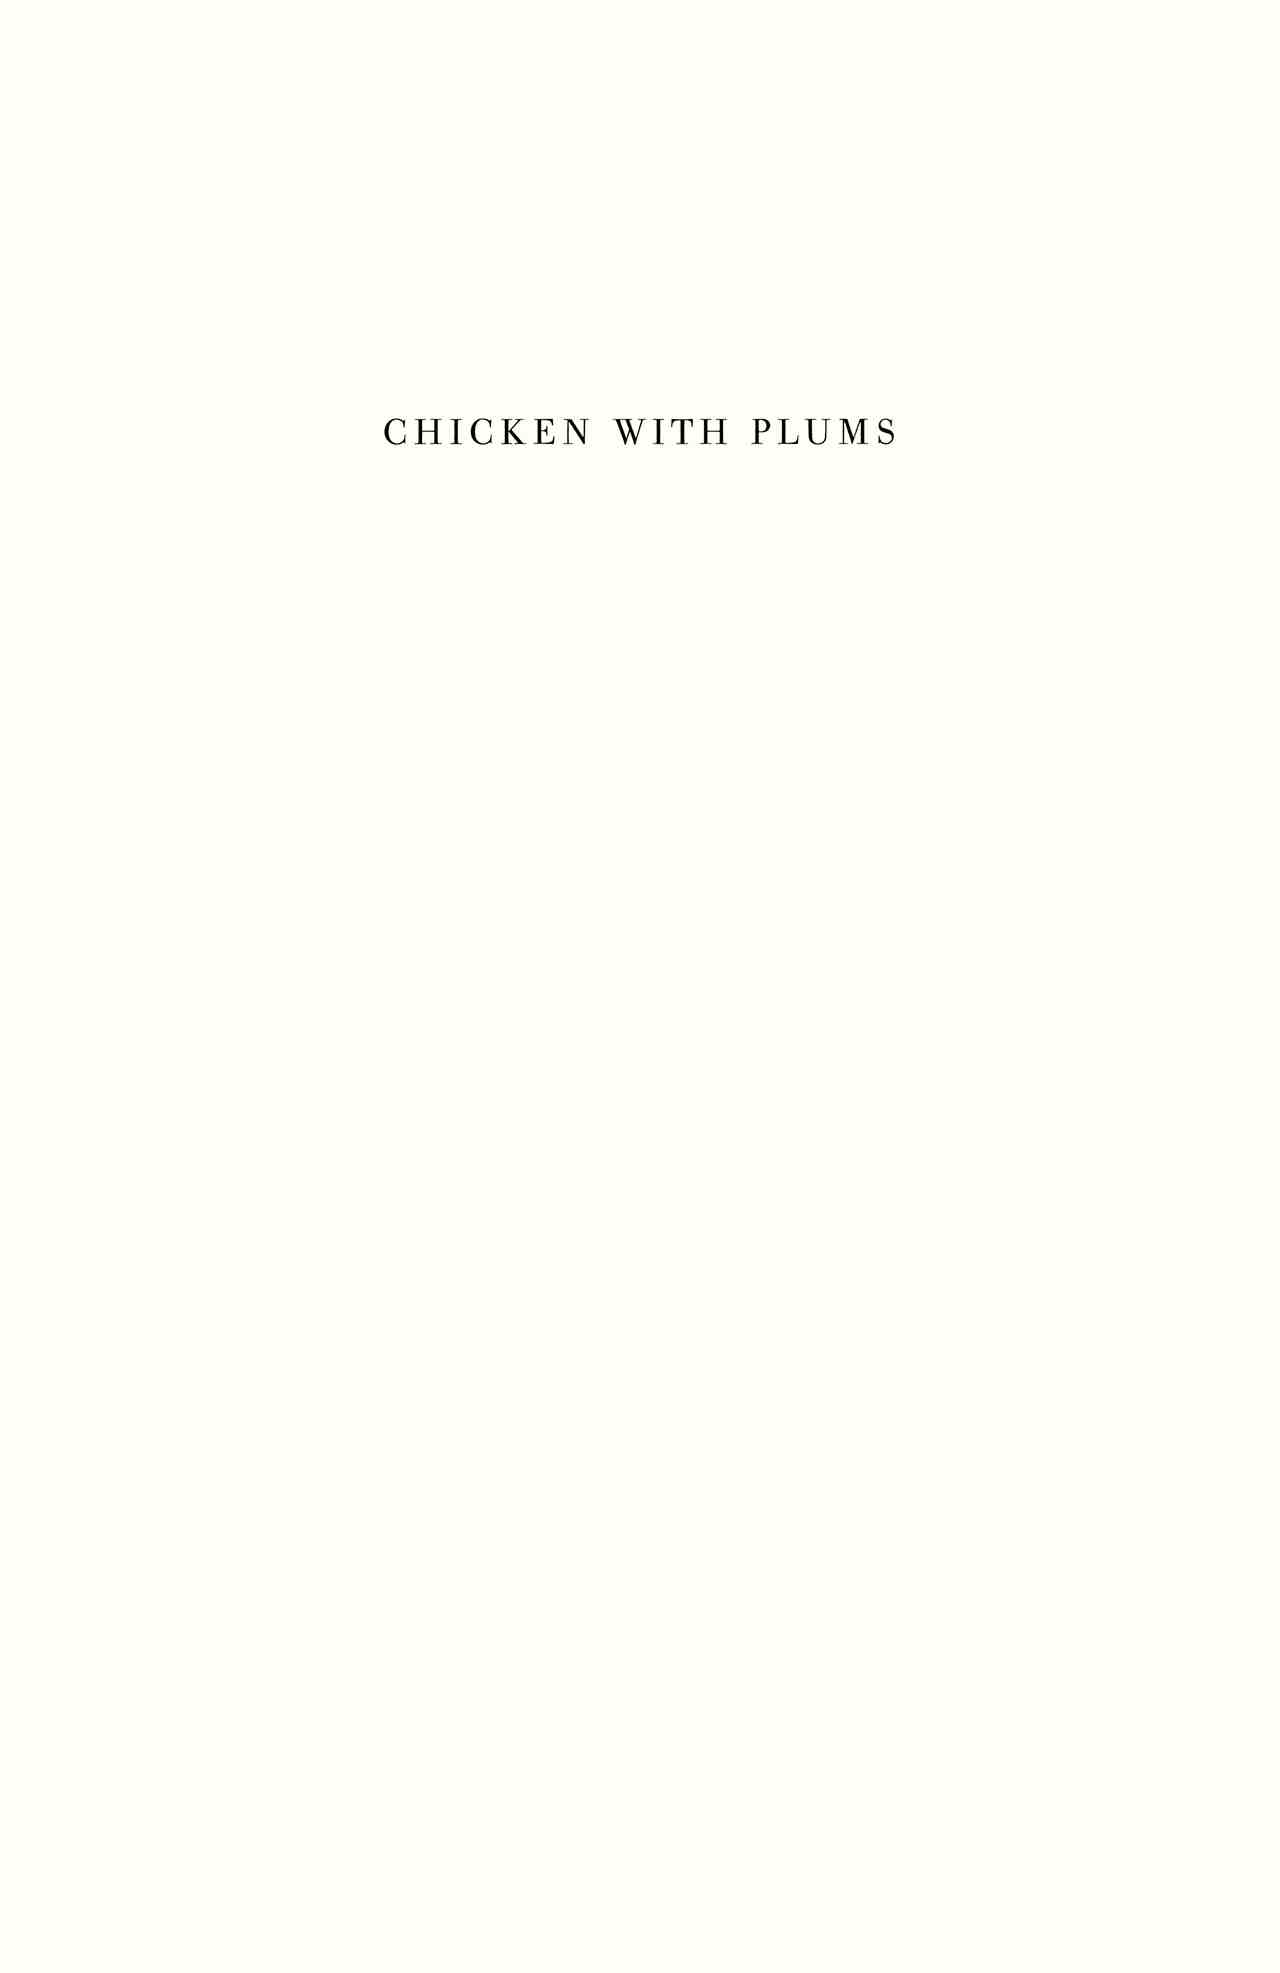 Read online Chicken With Plums comic -  Issue # TPB - 8